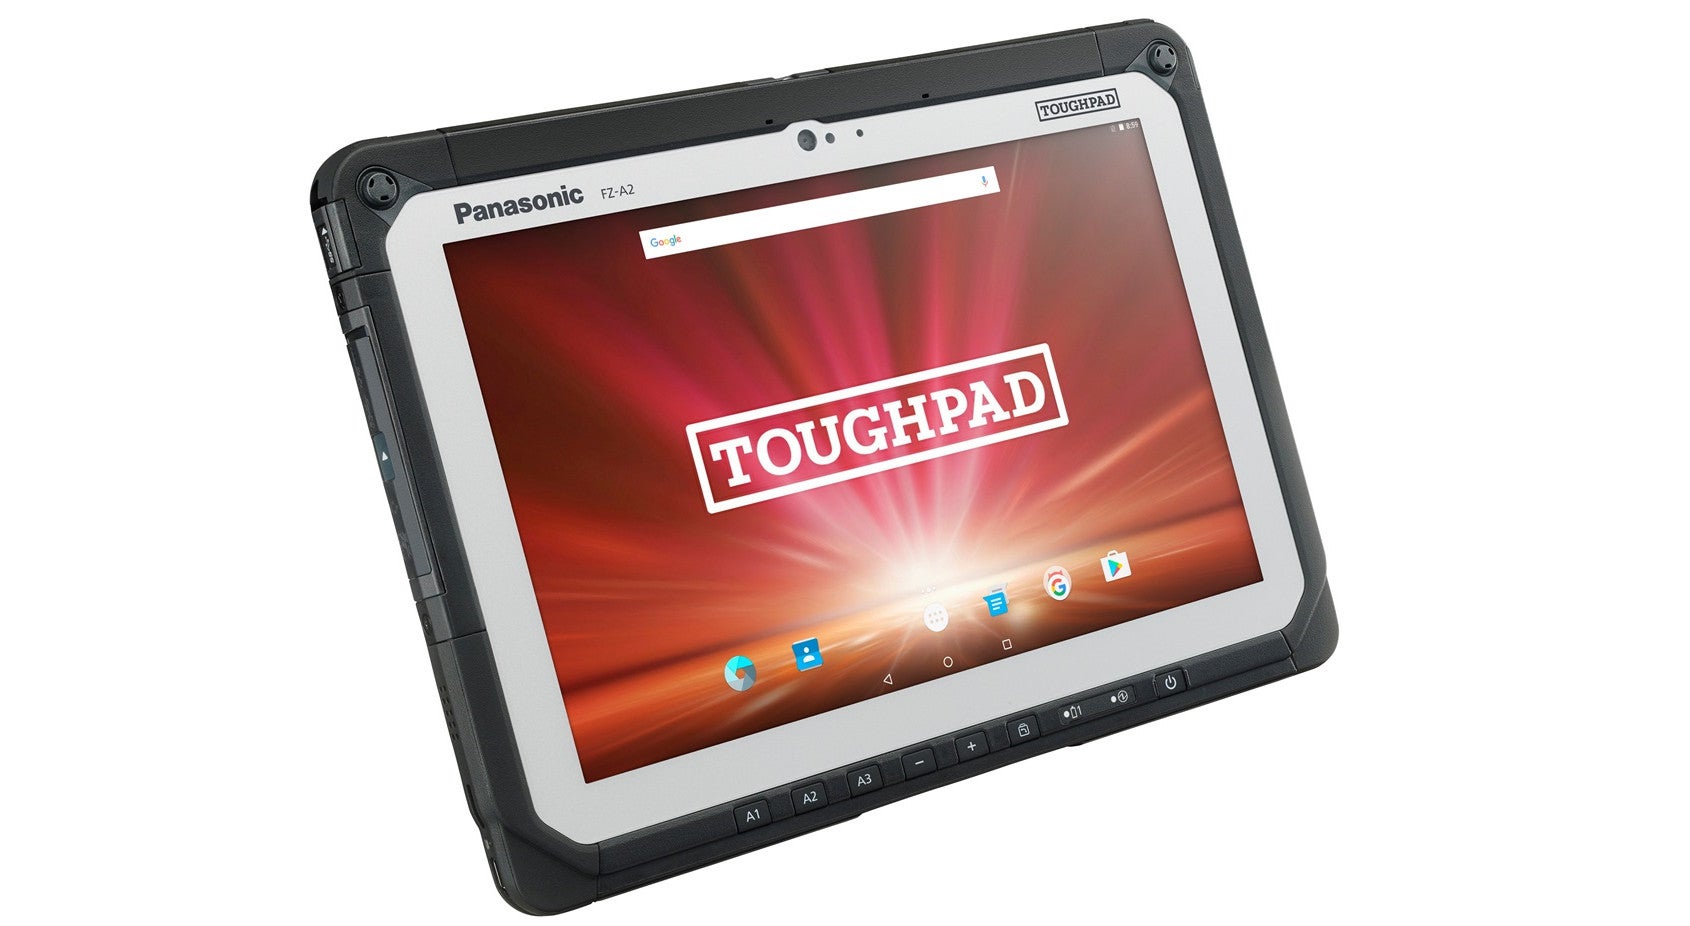 The Panasonic Toughpad FZ-A2 is a 10.1-inch Android rugged powerhouse aimed at enterprises